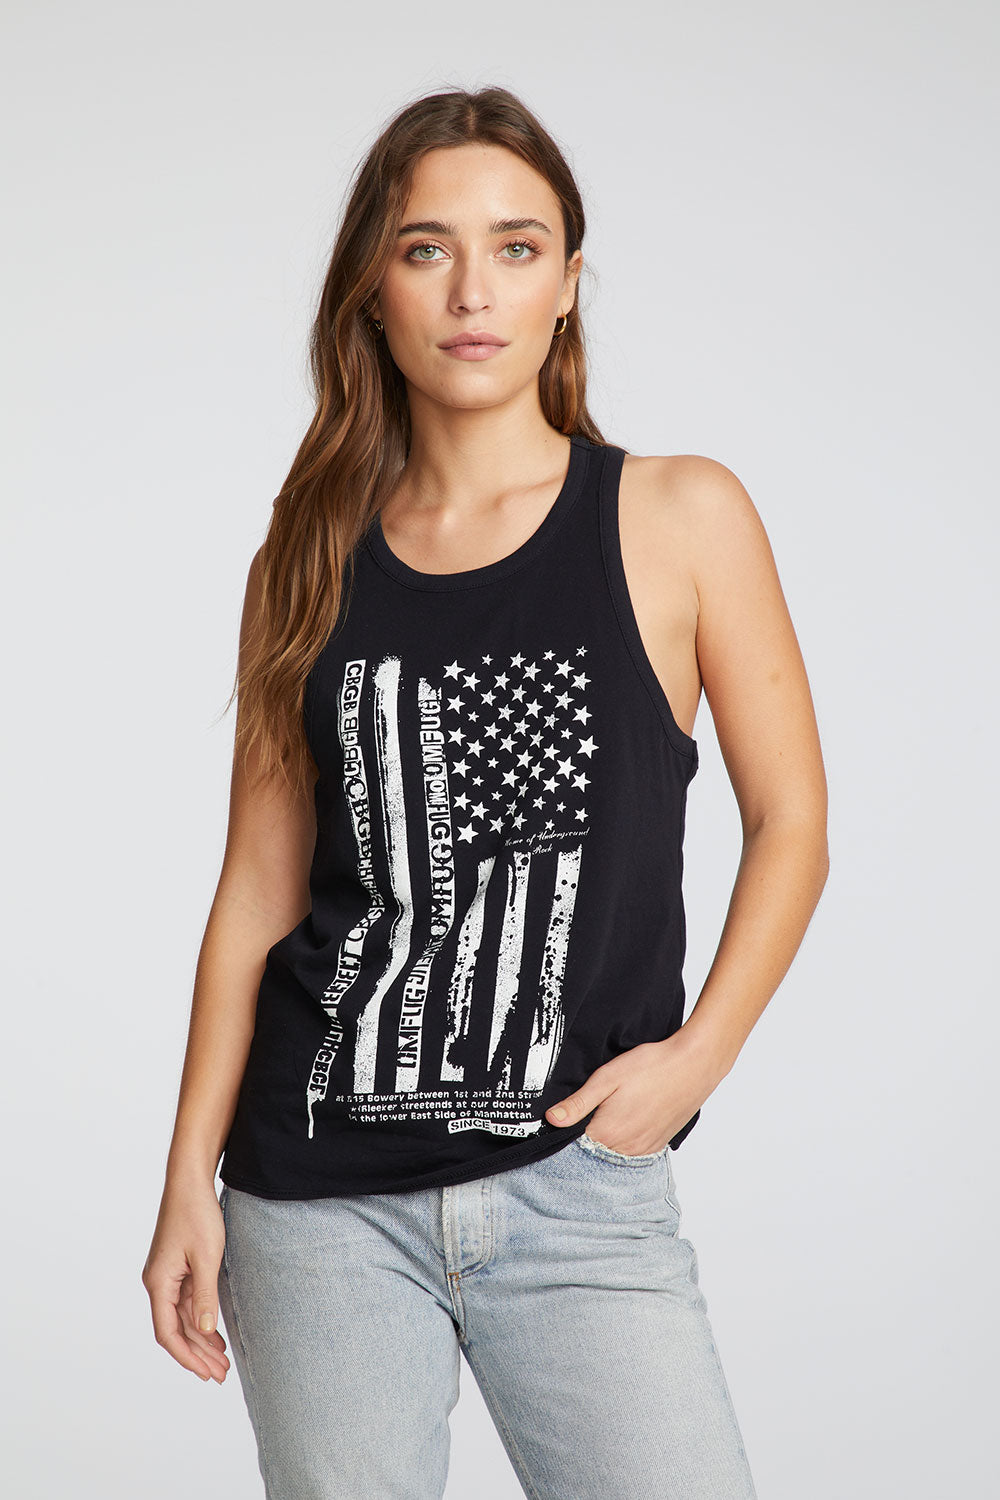 CBGB's Flag WOMENS chaserbrand